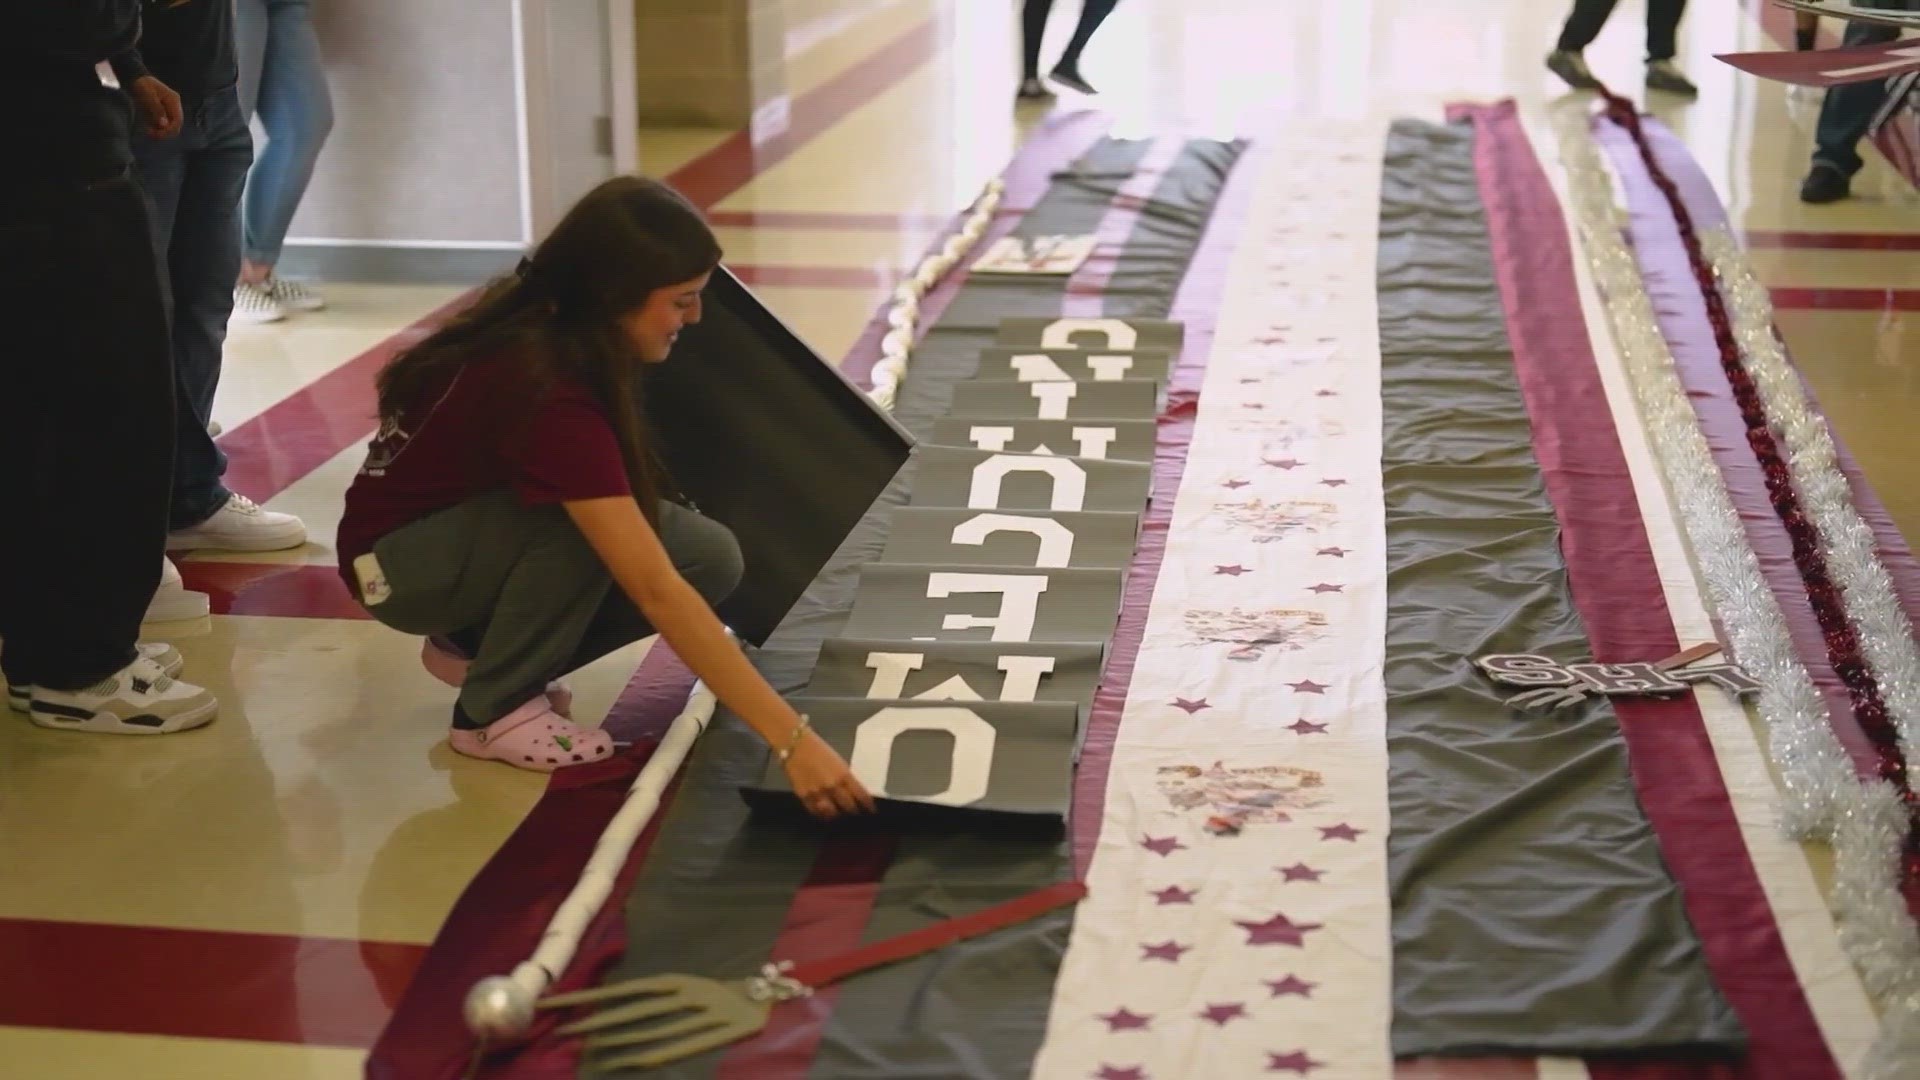 Lewisville High School is creating a mum that, when complete, will be 300 sq. feet. The base alone is 8 ft. wide.